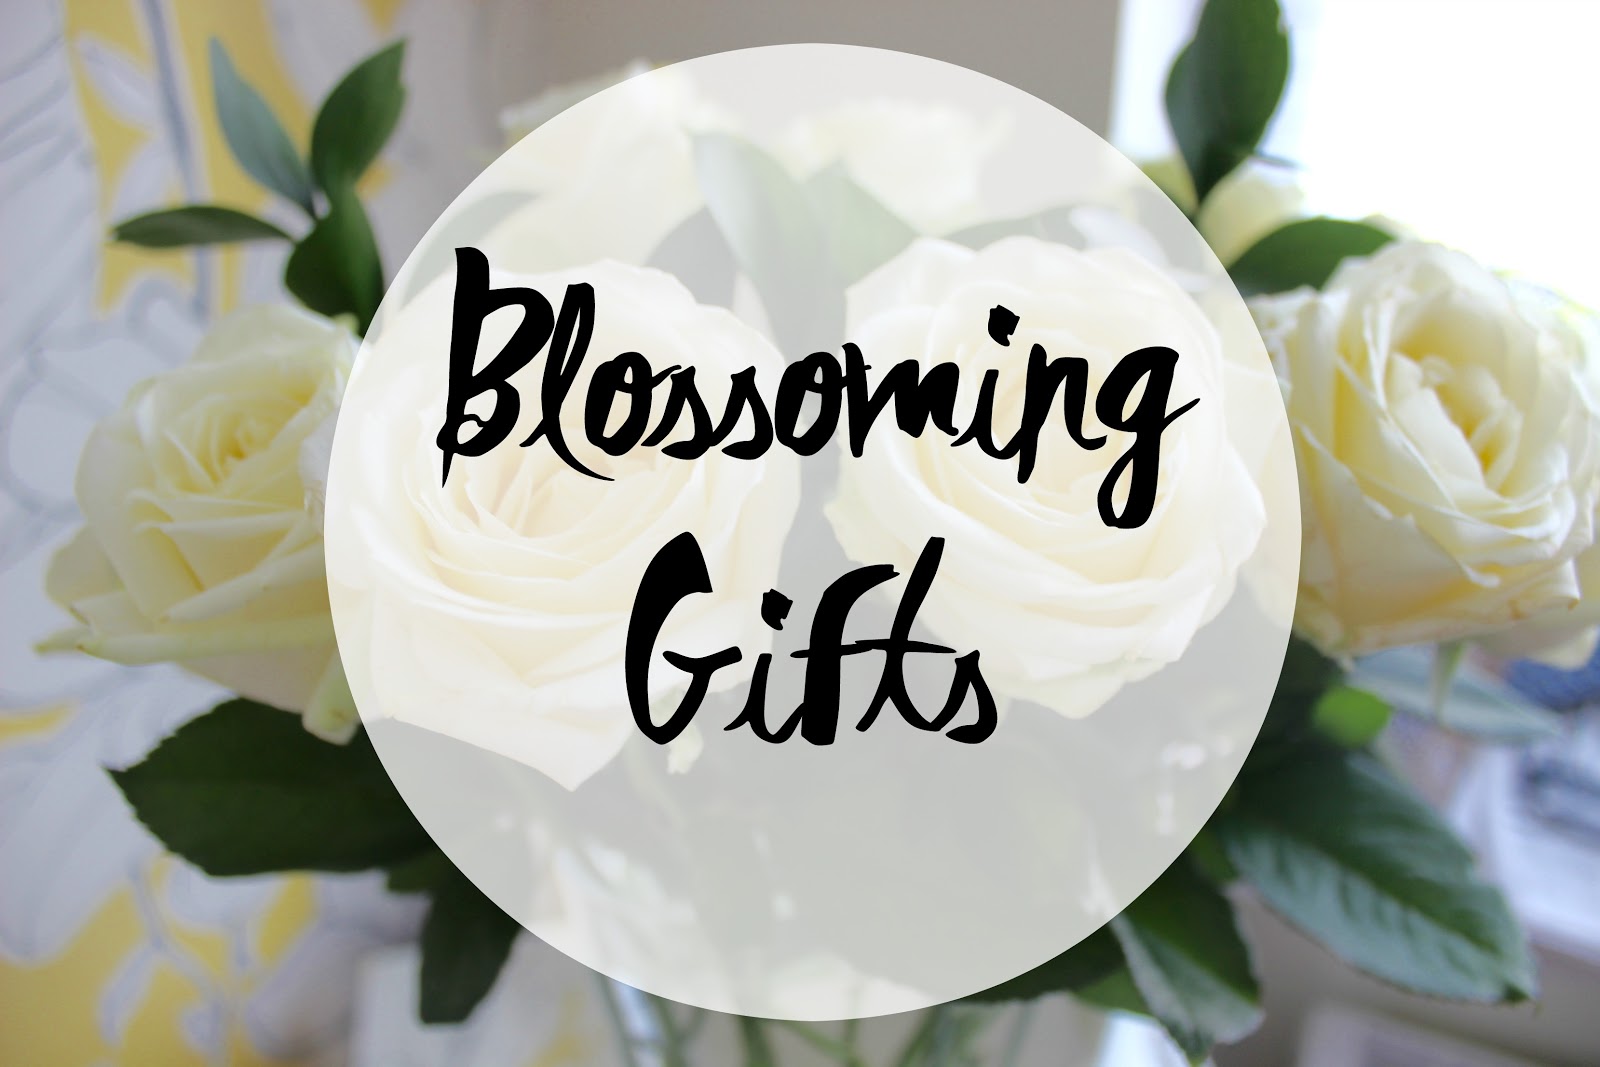 Blossoming gifts, cotton roses, flowers, 